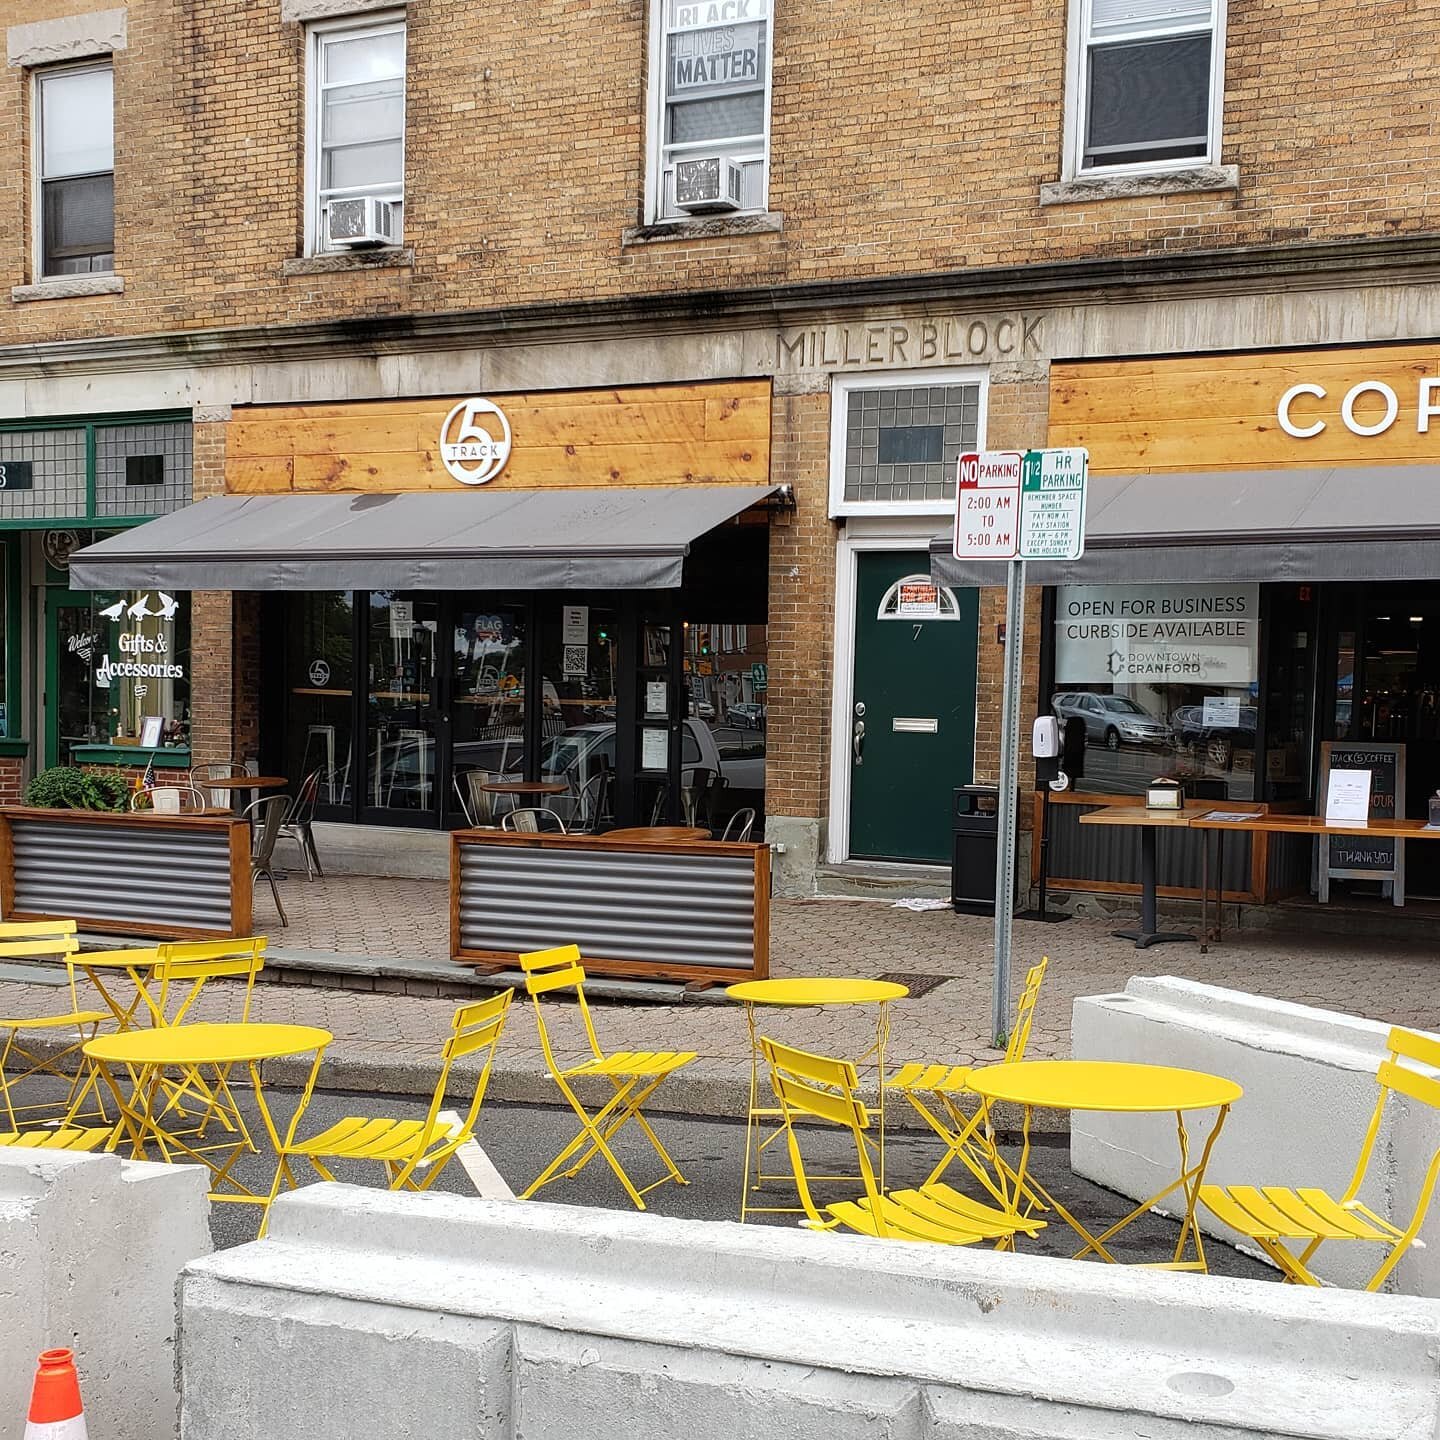 New parklet + tables &amp; chairs = perfect place to enjoy a cup of coffee from @track5coffee!

#cranford #downtowncranford #cranfordnj